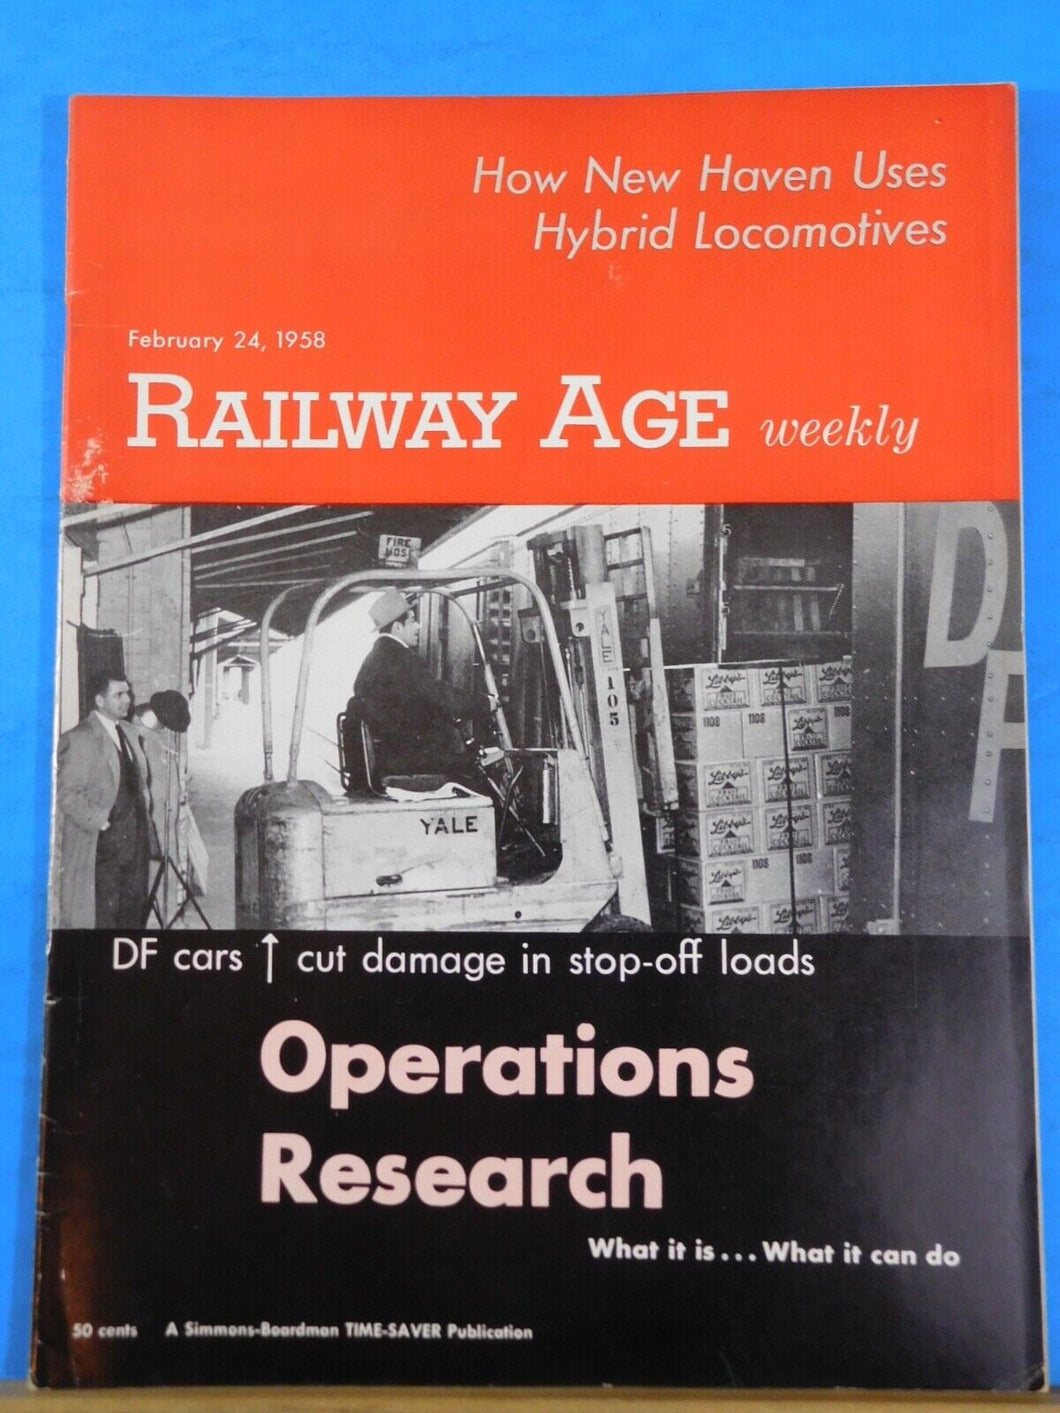 Railway Age Weekly 1958 Feb 24 Operations Research New HAven hybrid Locomotives